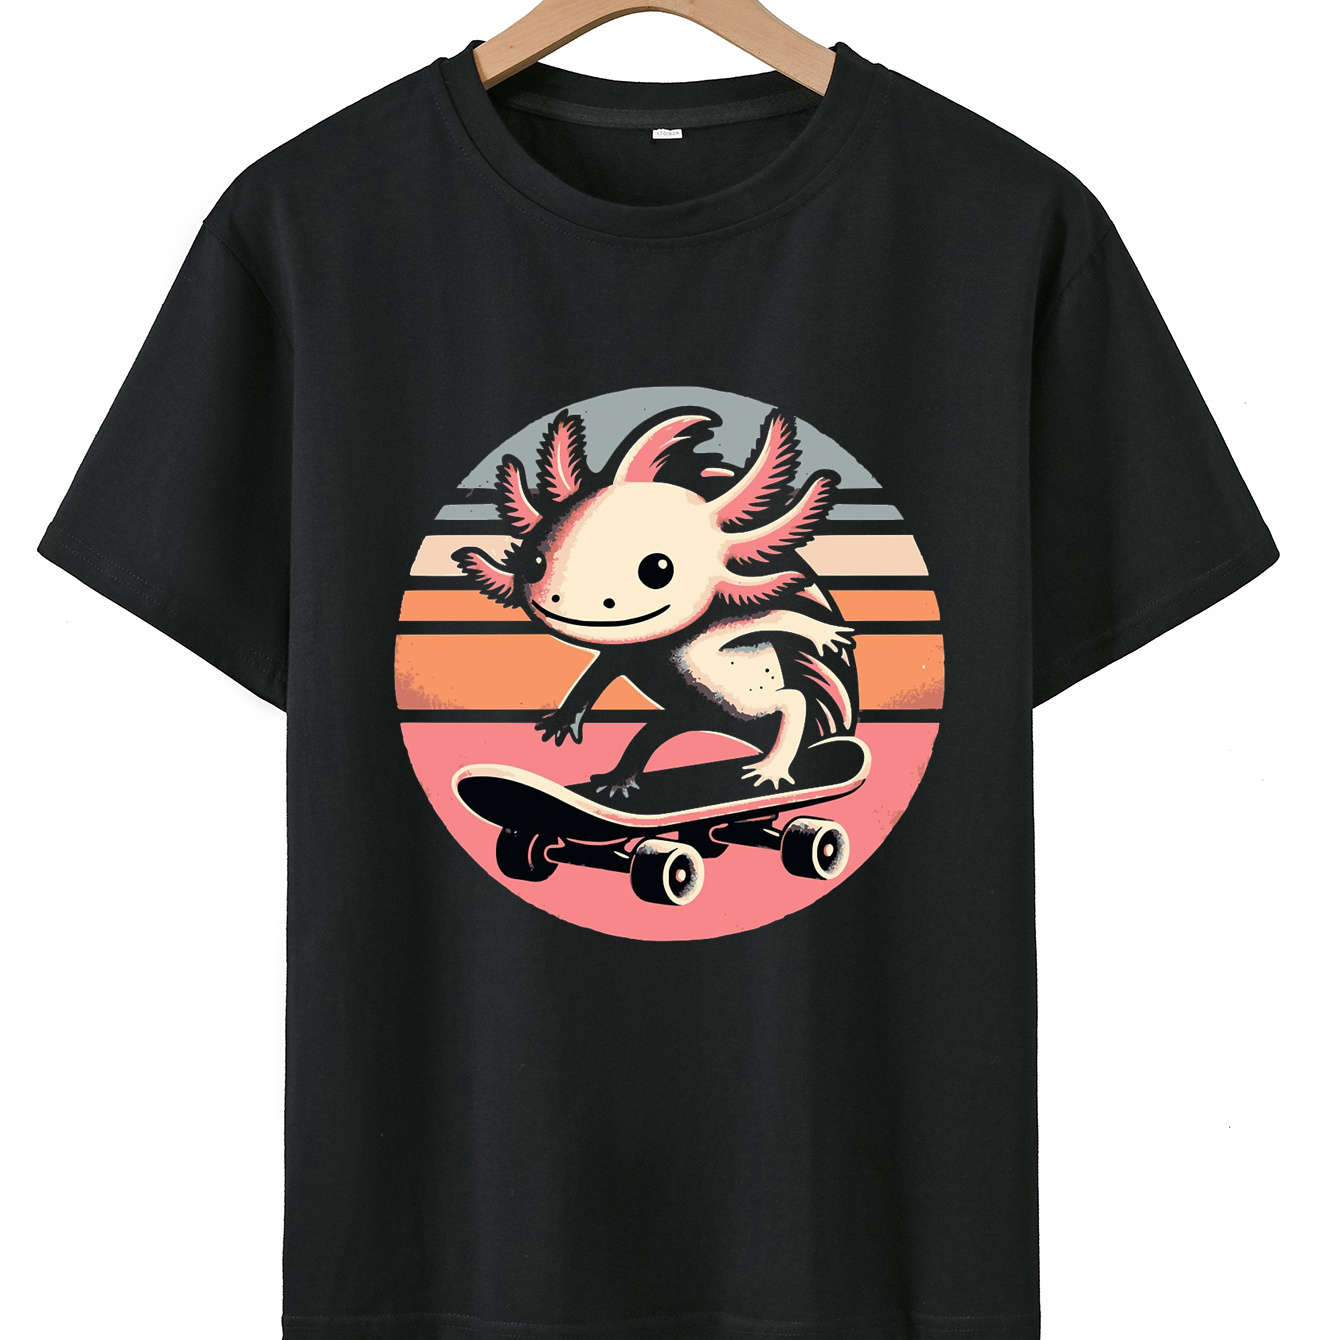 

Skate Axolotl Print Boy's And Teenager's Creative Cotton T-shirt, Casual Short Sleeve Crew Neck Pullover Top Summer Clothing